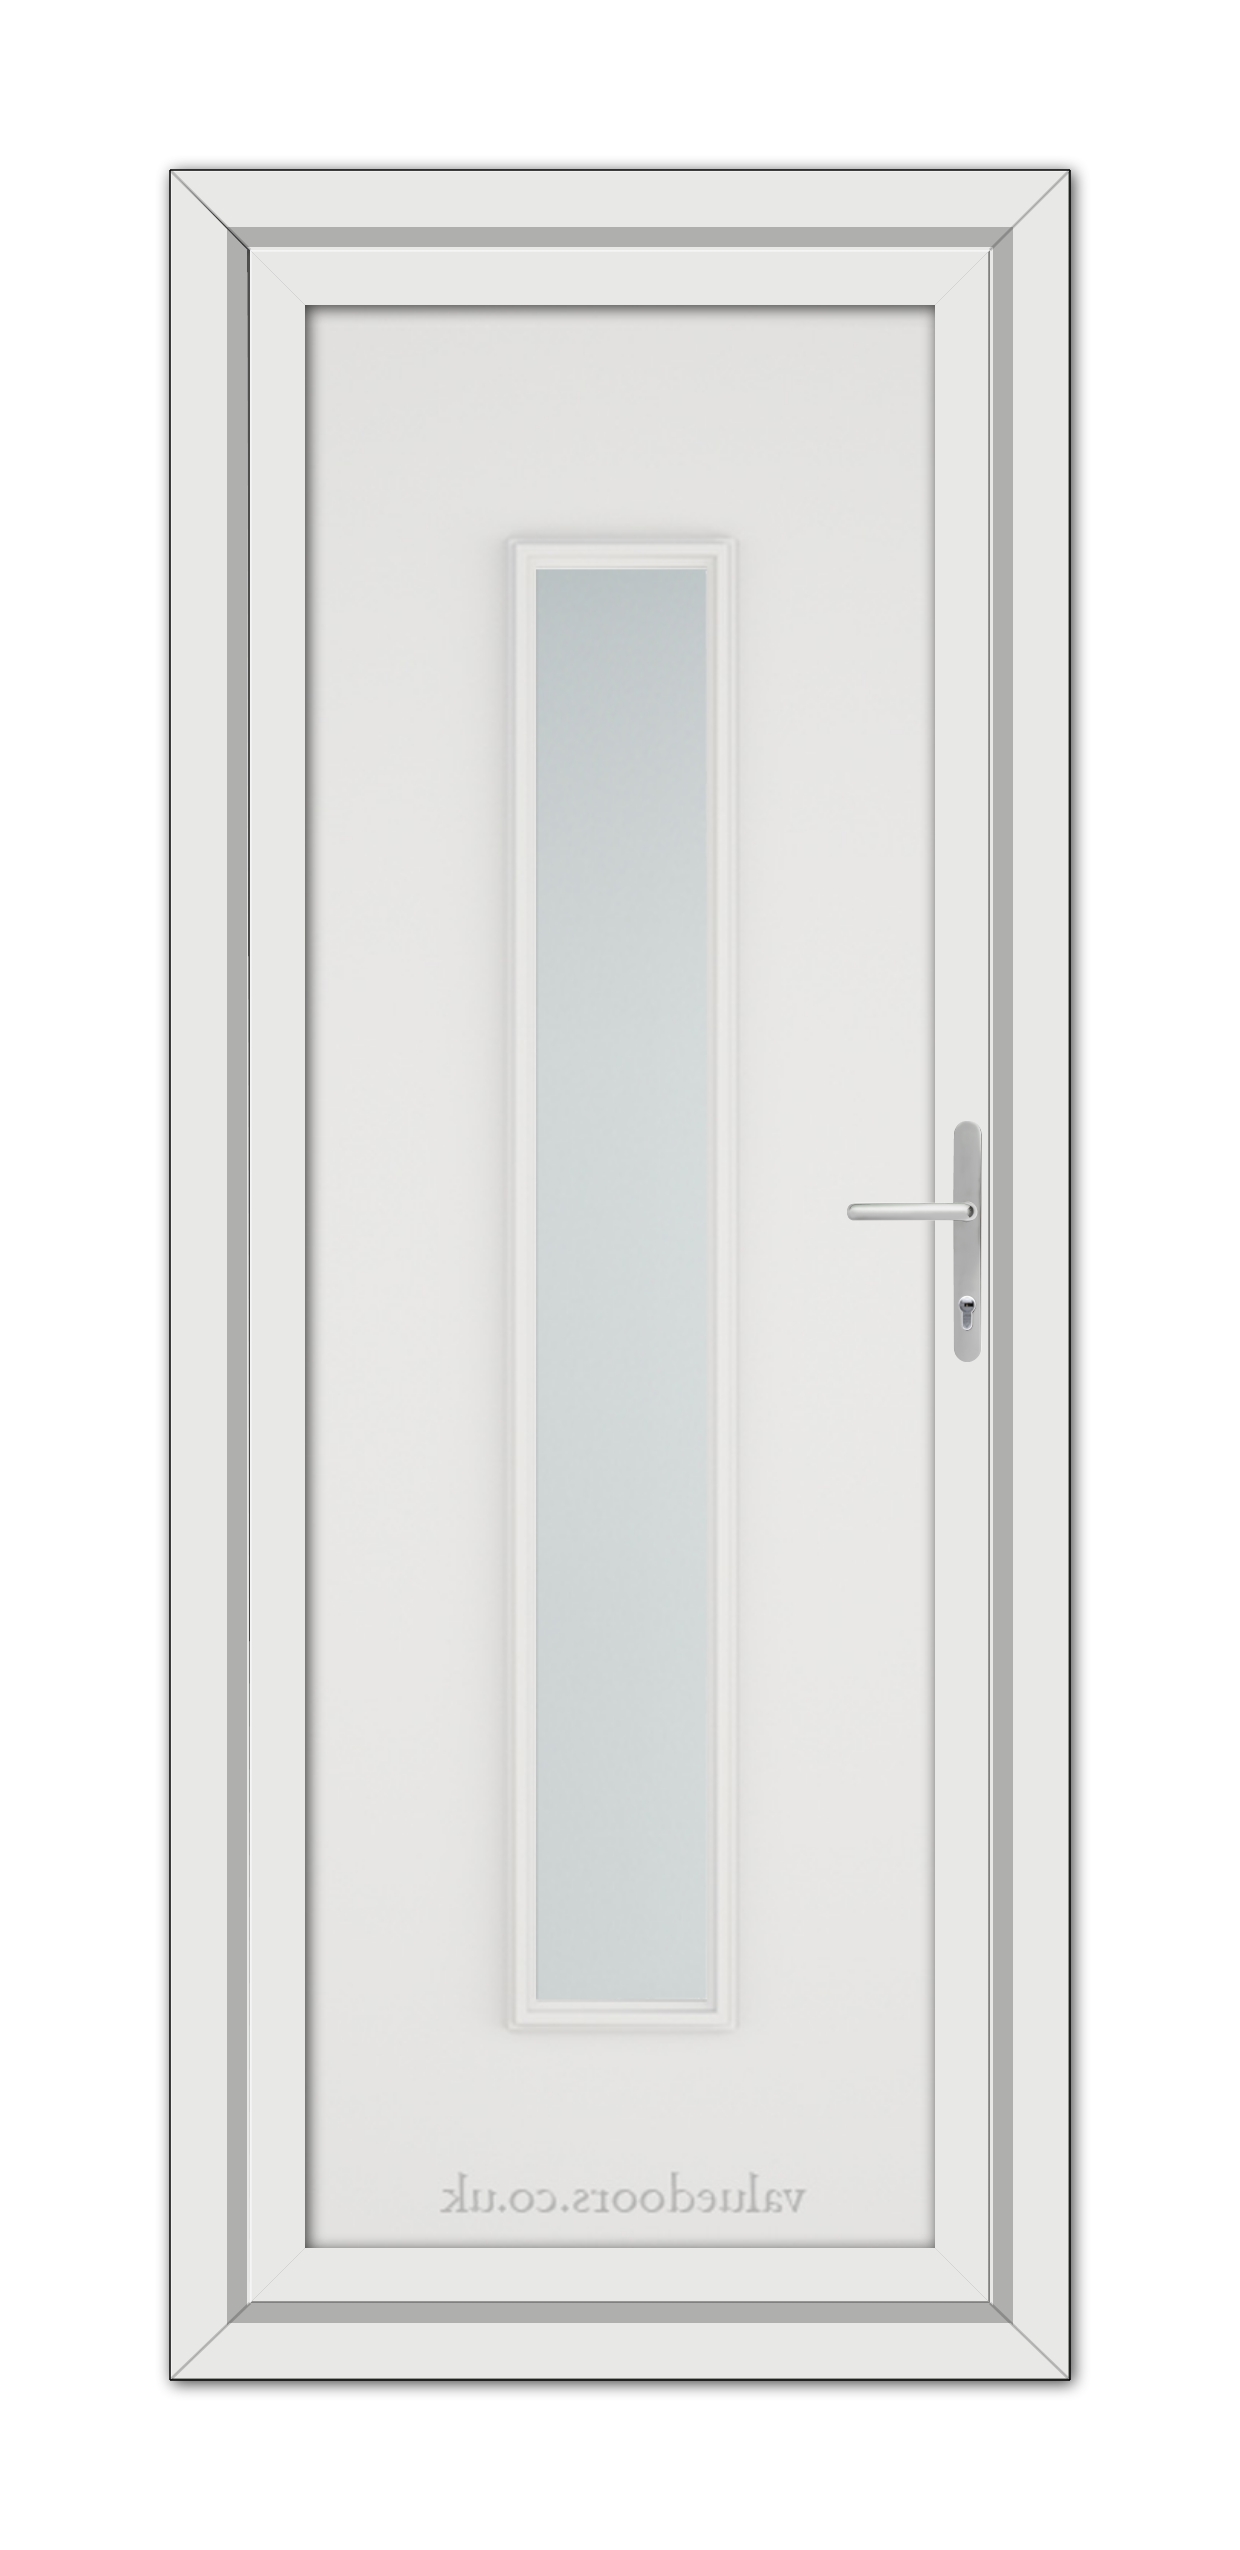 White Rome uPVC door with a vertical, frosted glass panel and a silver handle, set in a simple frame, viewed from the front.